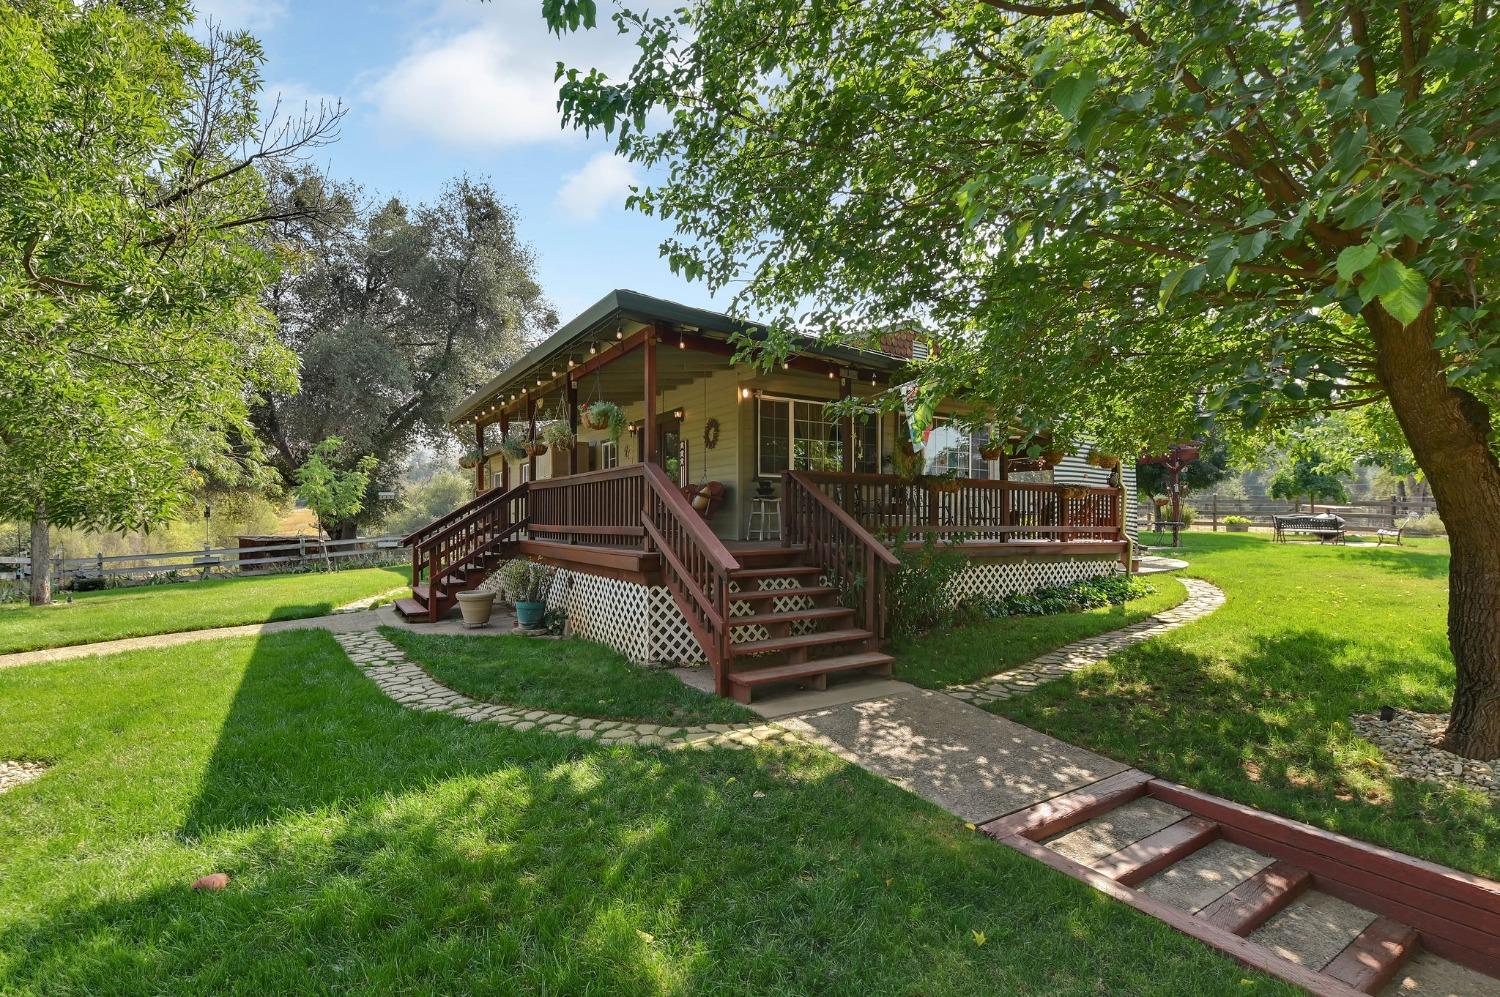 Photo of 2946 Twin Oaks Rd in Angels Camp, CA